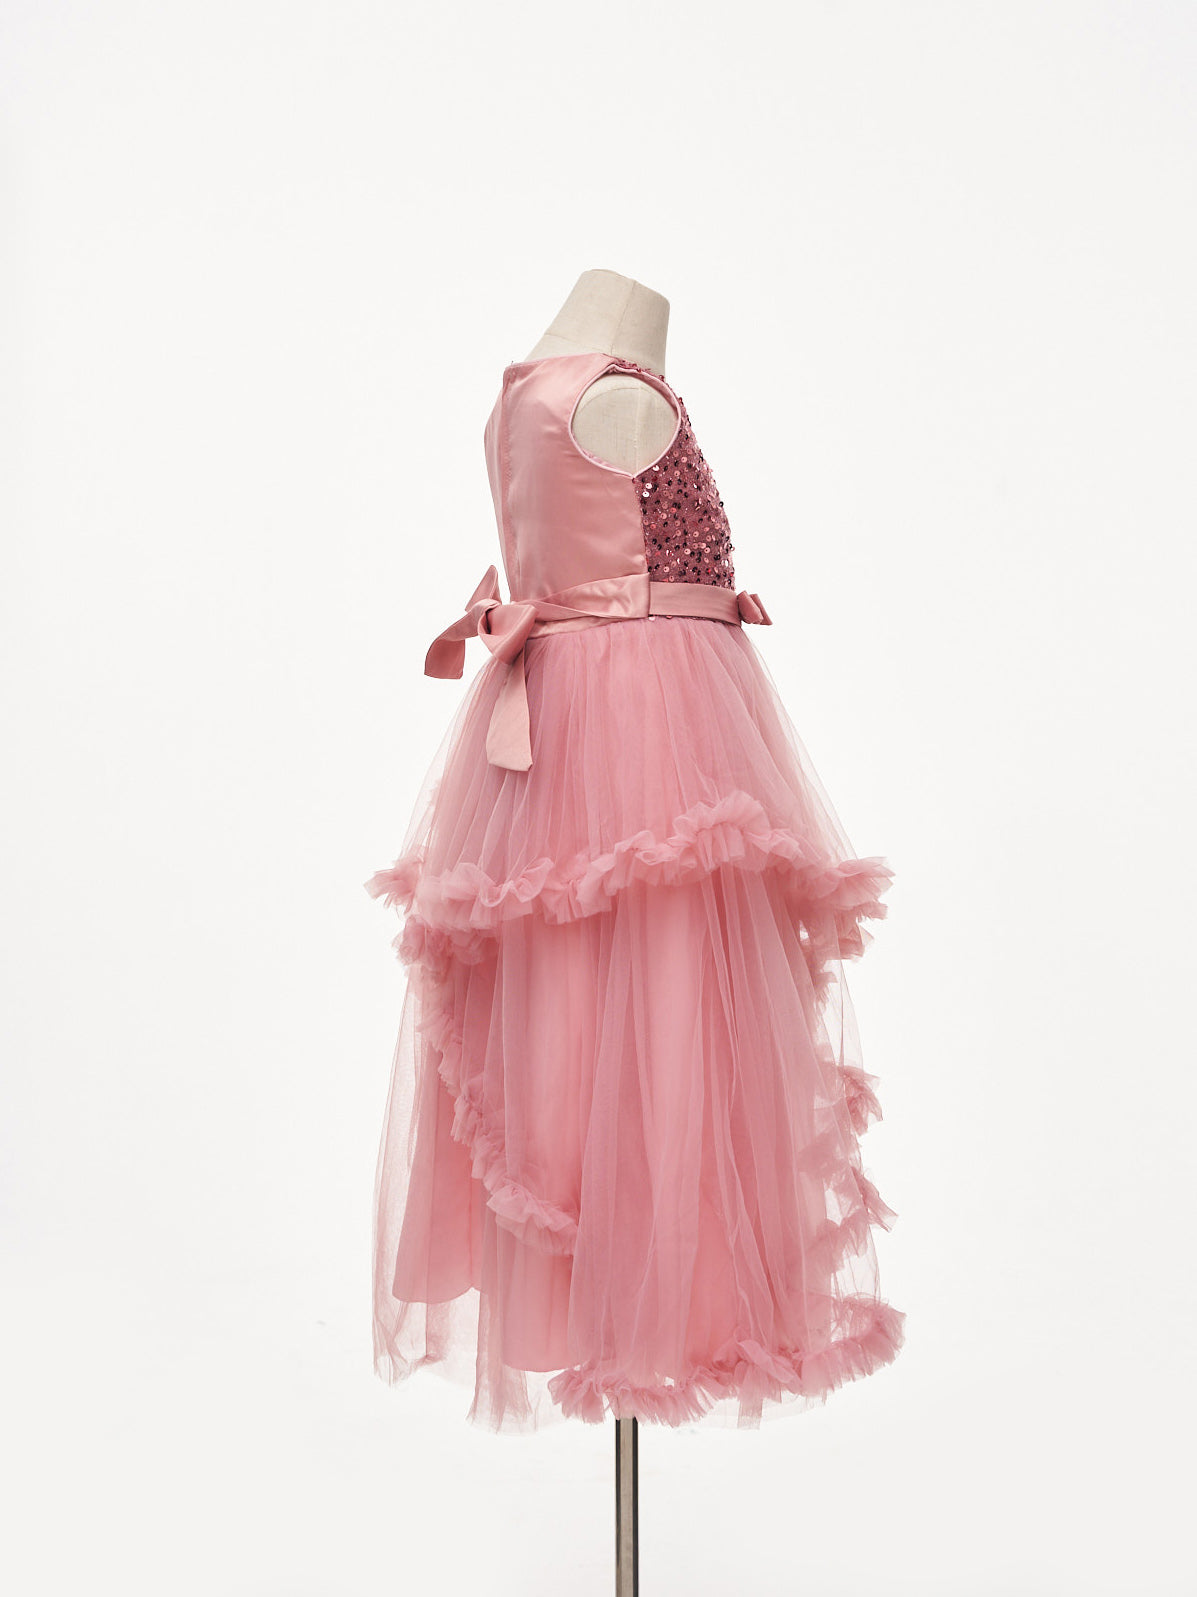 Kate Pink Sequin Tulle Princess Kids Dress for Photography